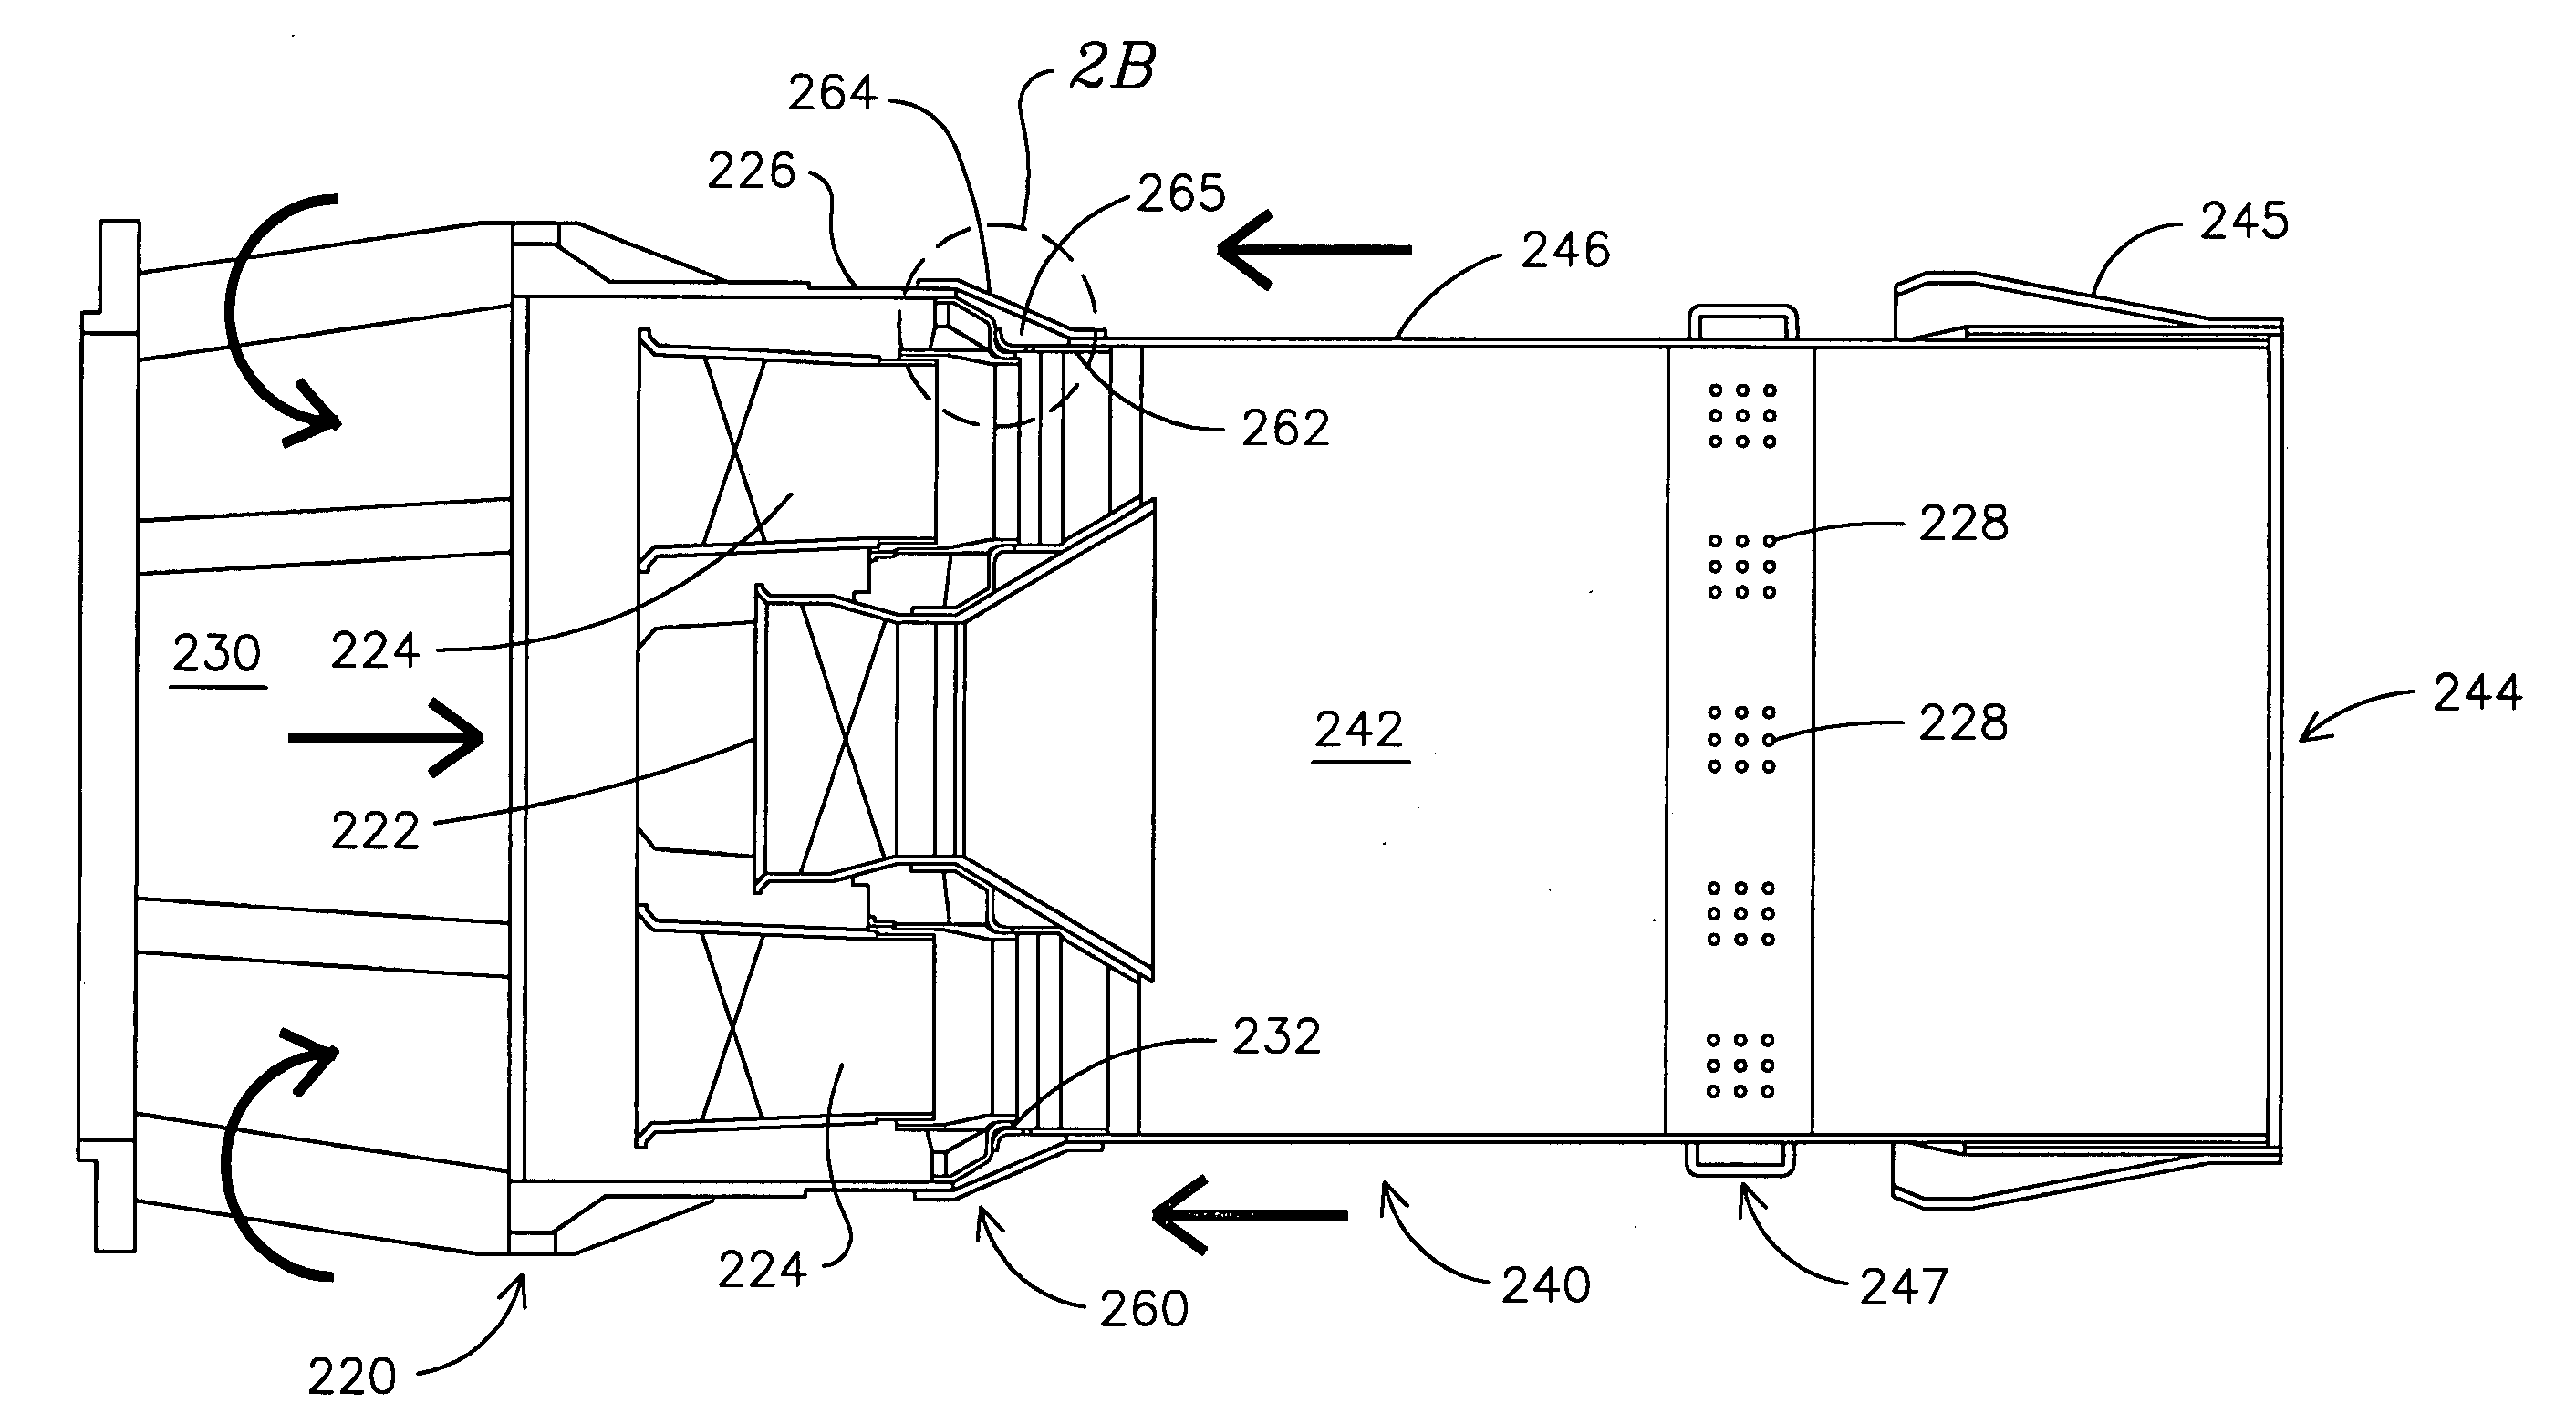 Resonator device at junction of combustor and combustion chamber